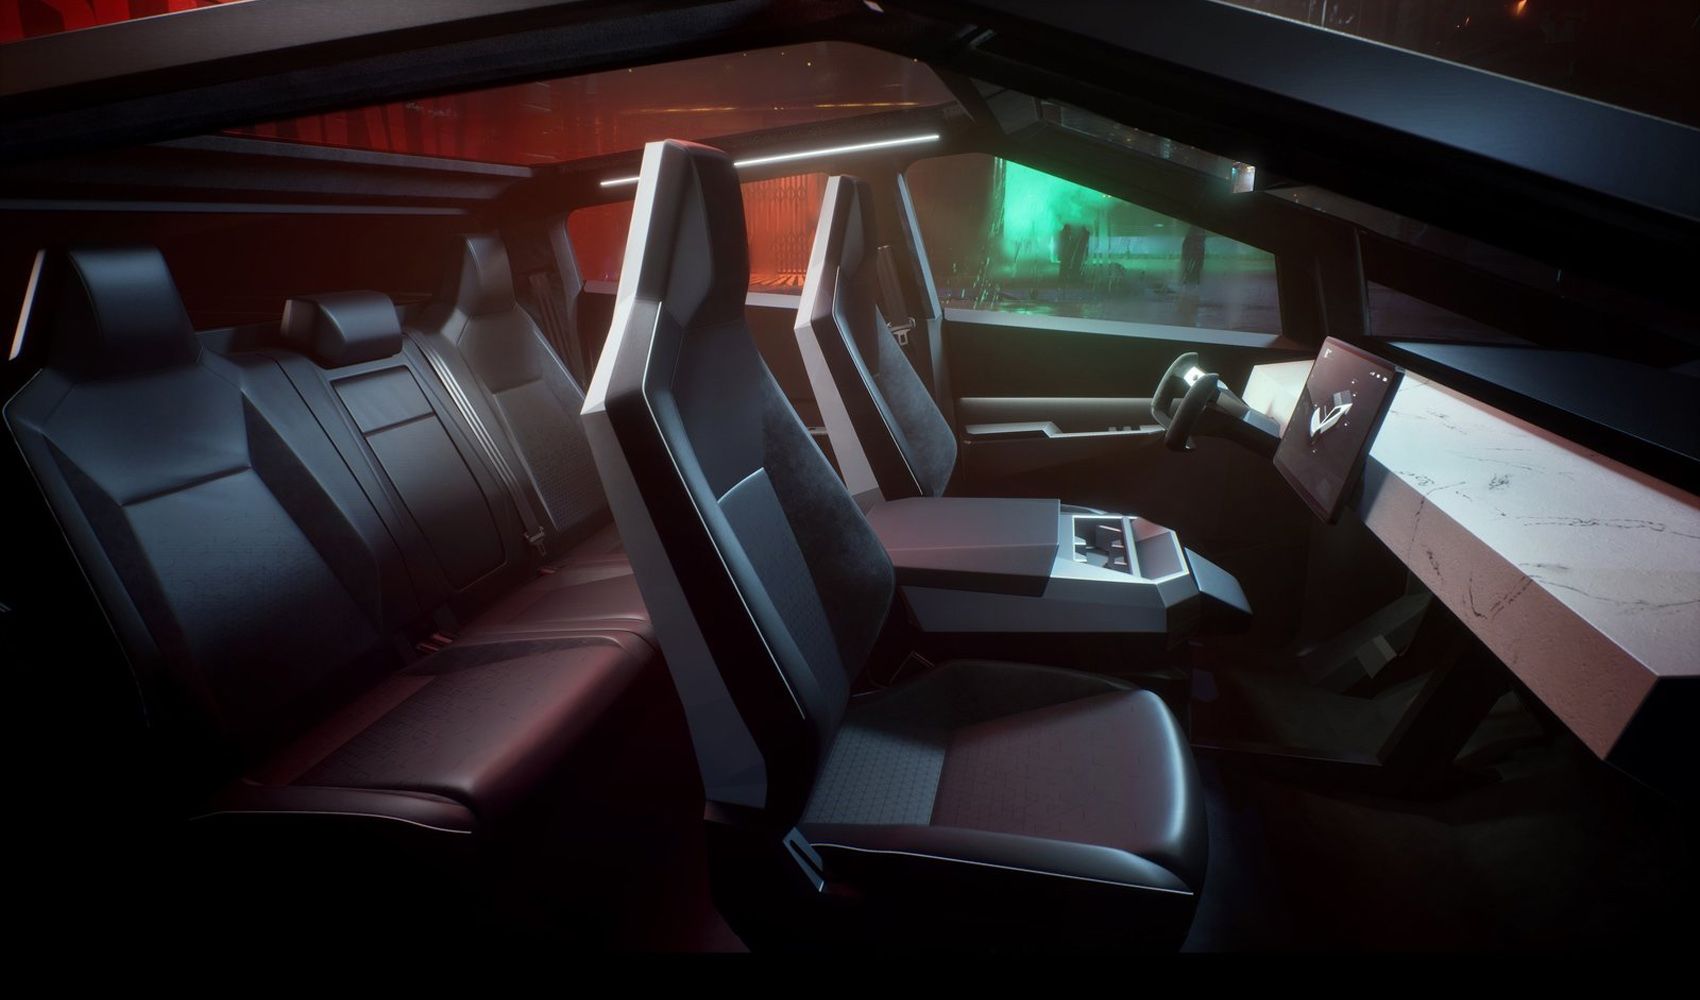 Interior View Of The All-Electric 2022 Tesla Cybertruck Pickup Truck